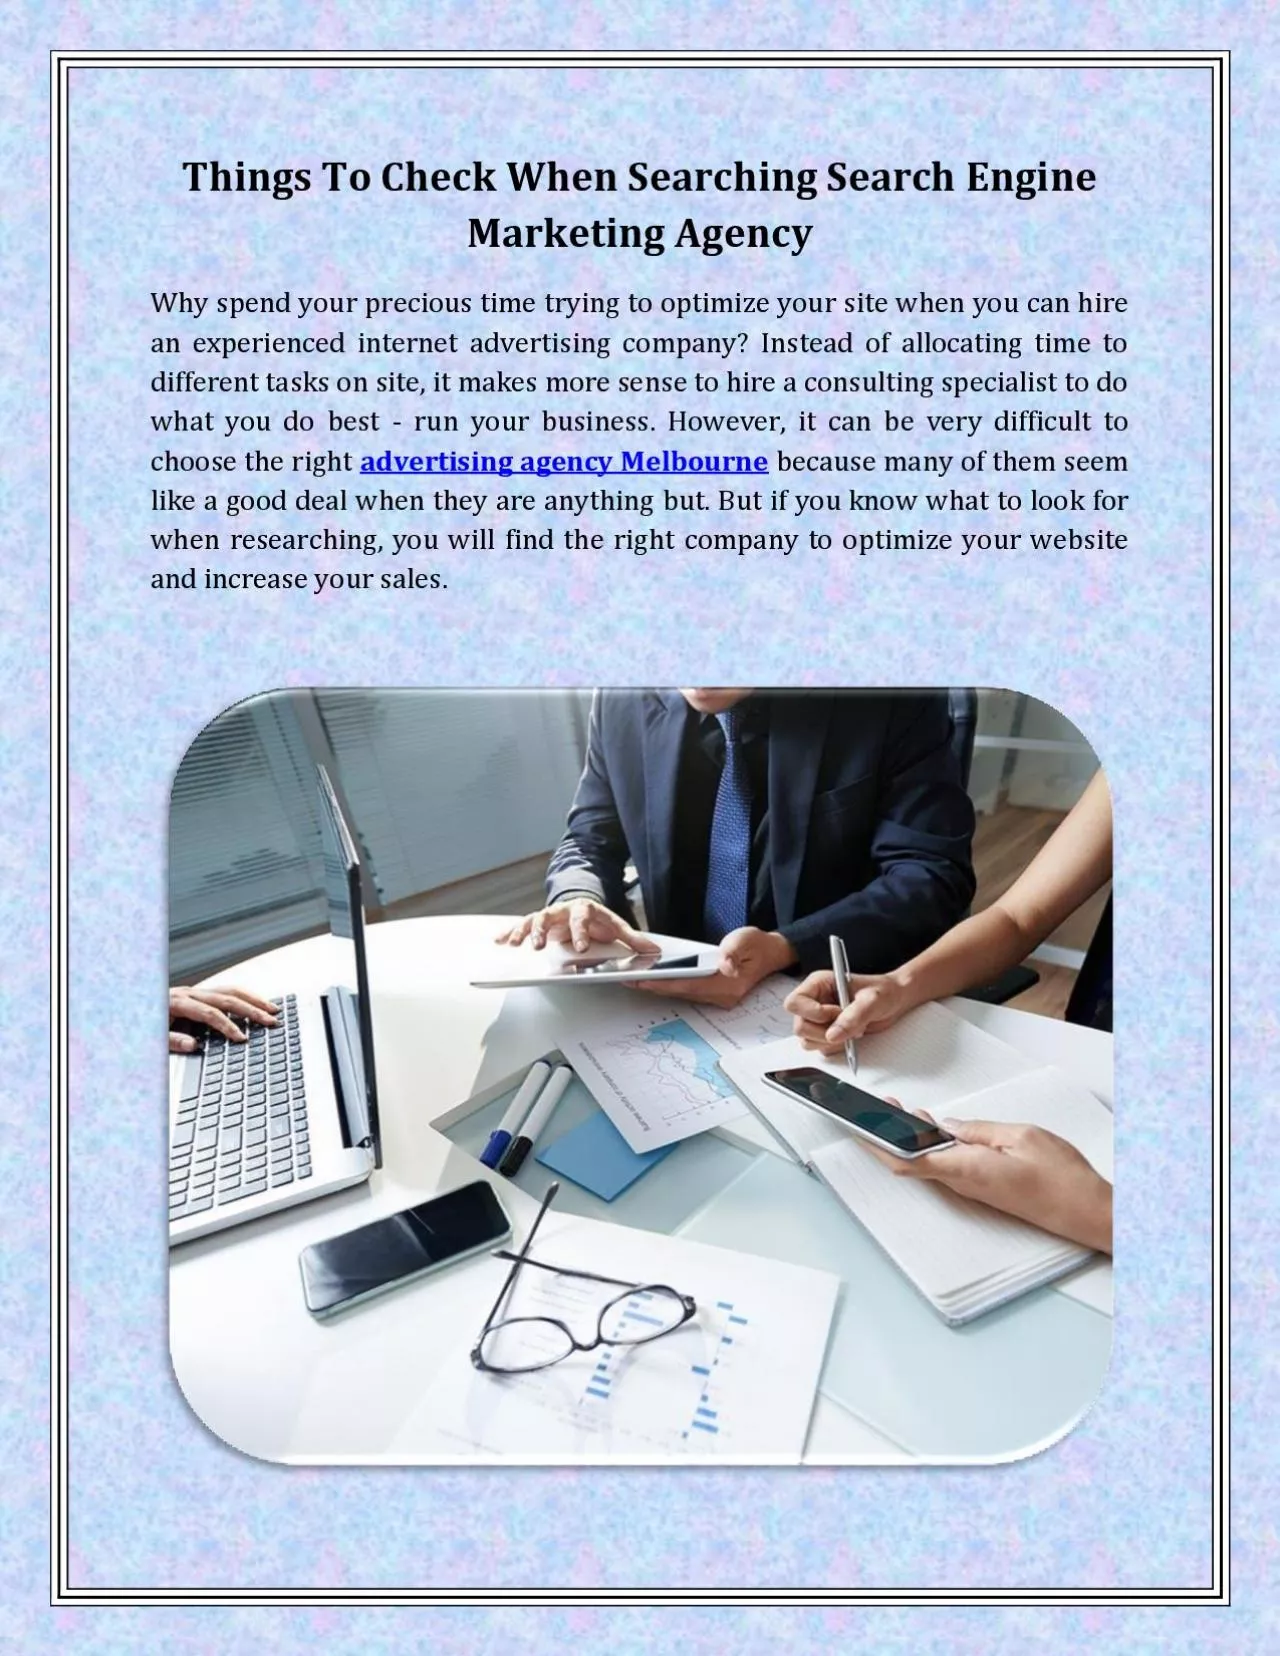 Things To Check When Searching Search Engine Marketing Agency